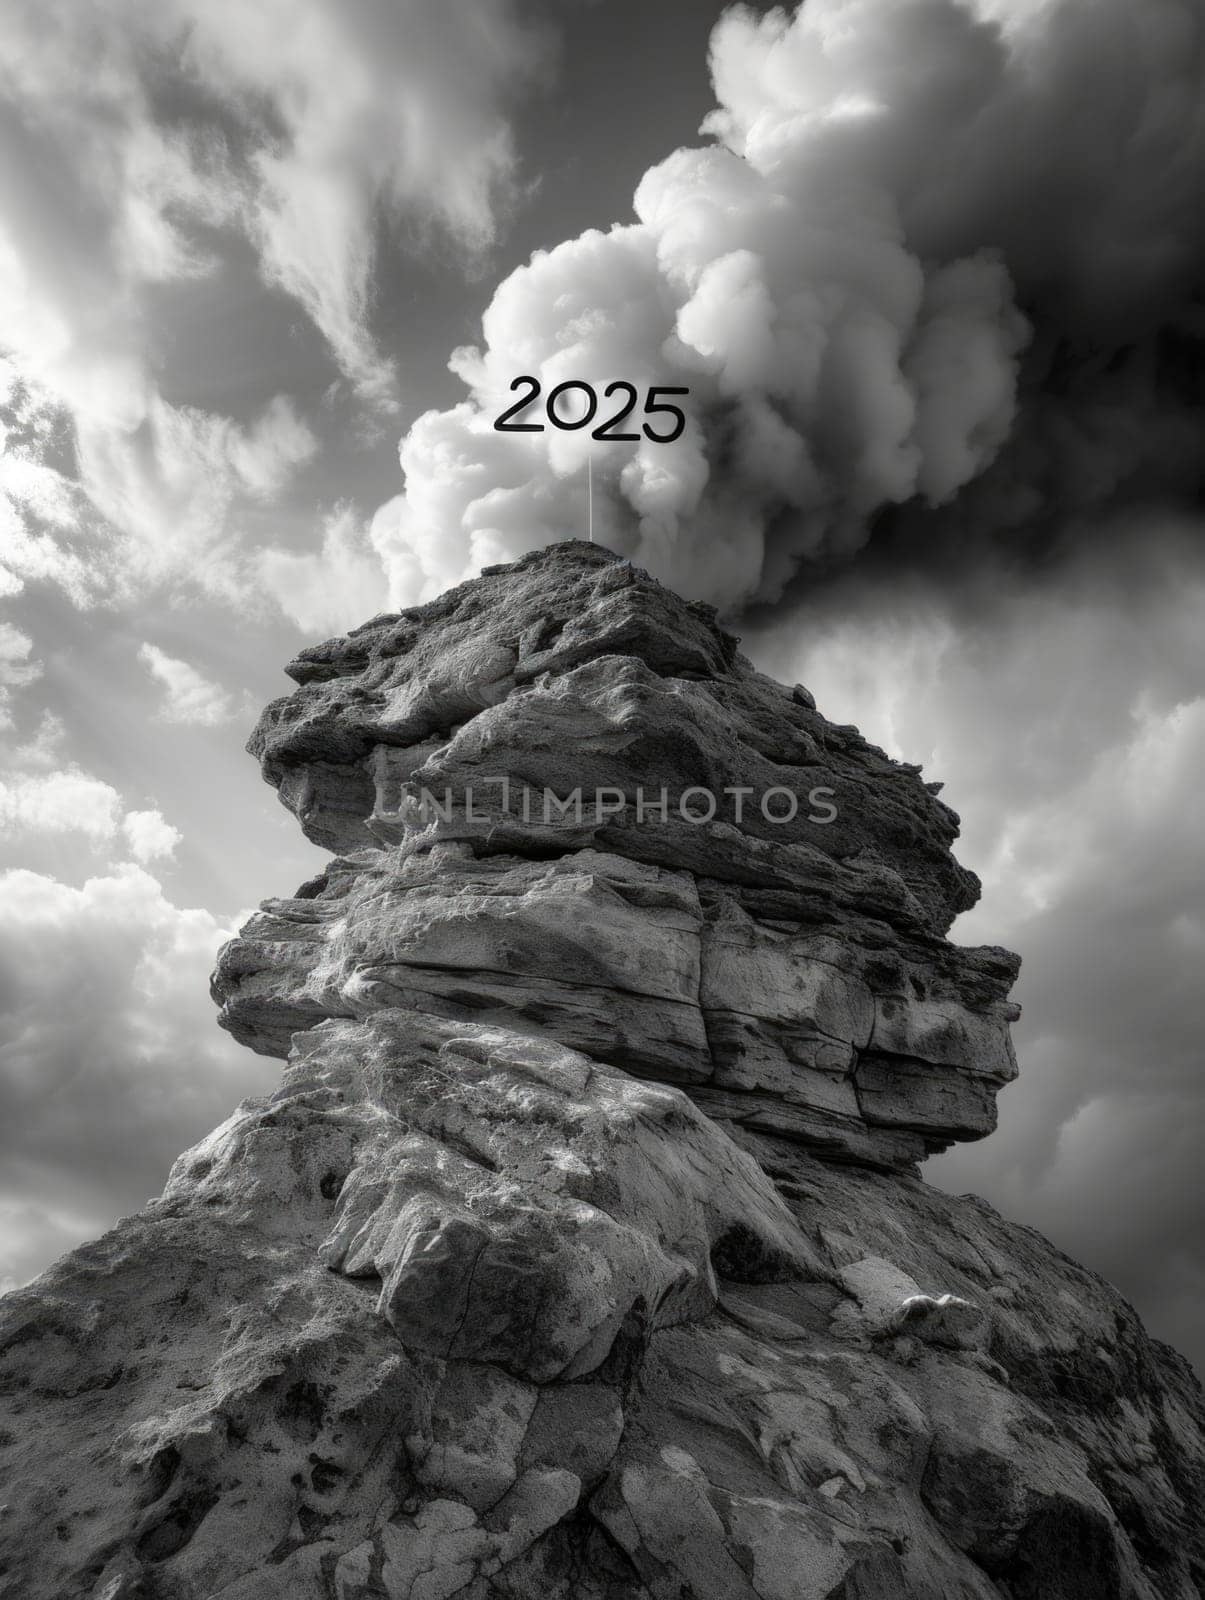 A striking black and white photograph showcasing a magnificent rock formation in its natural splendor.